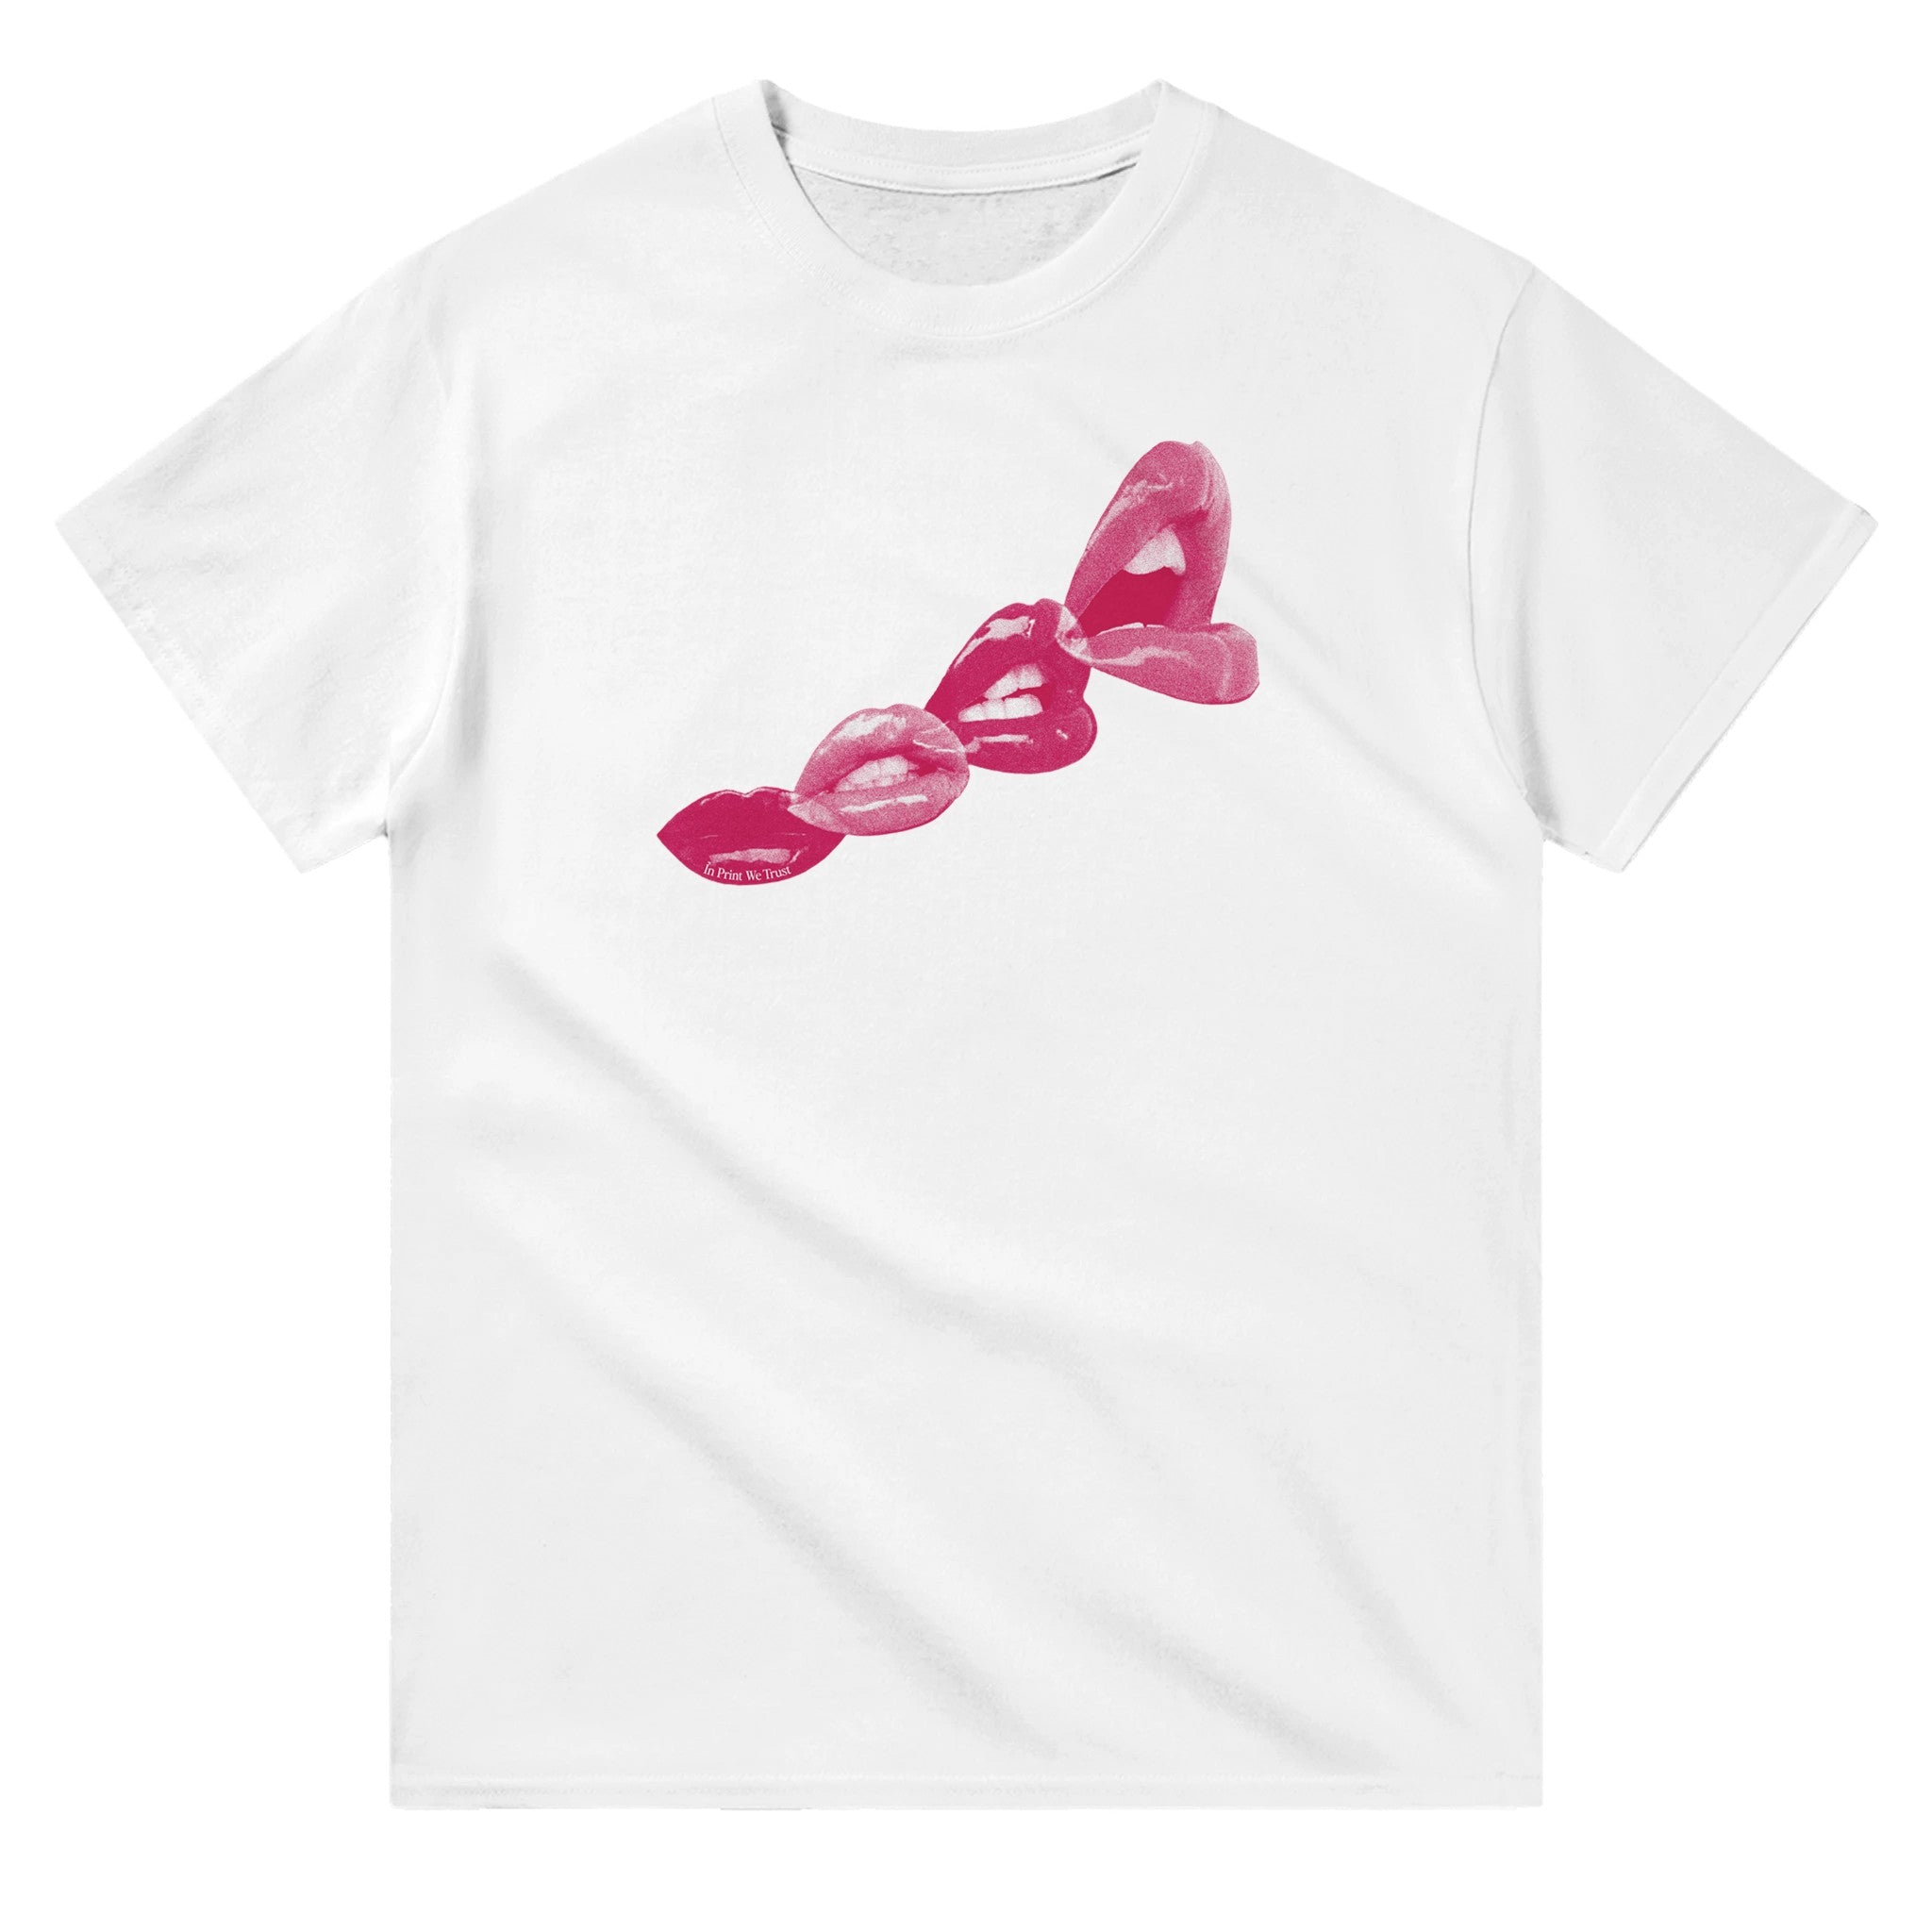 'Give Me a Kiss' classic tee - In Print We Trust